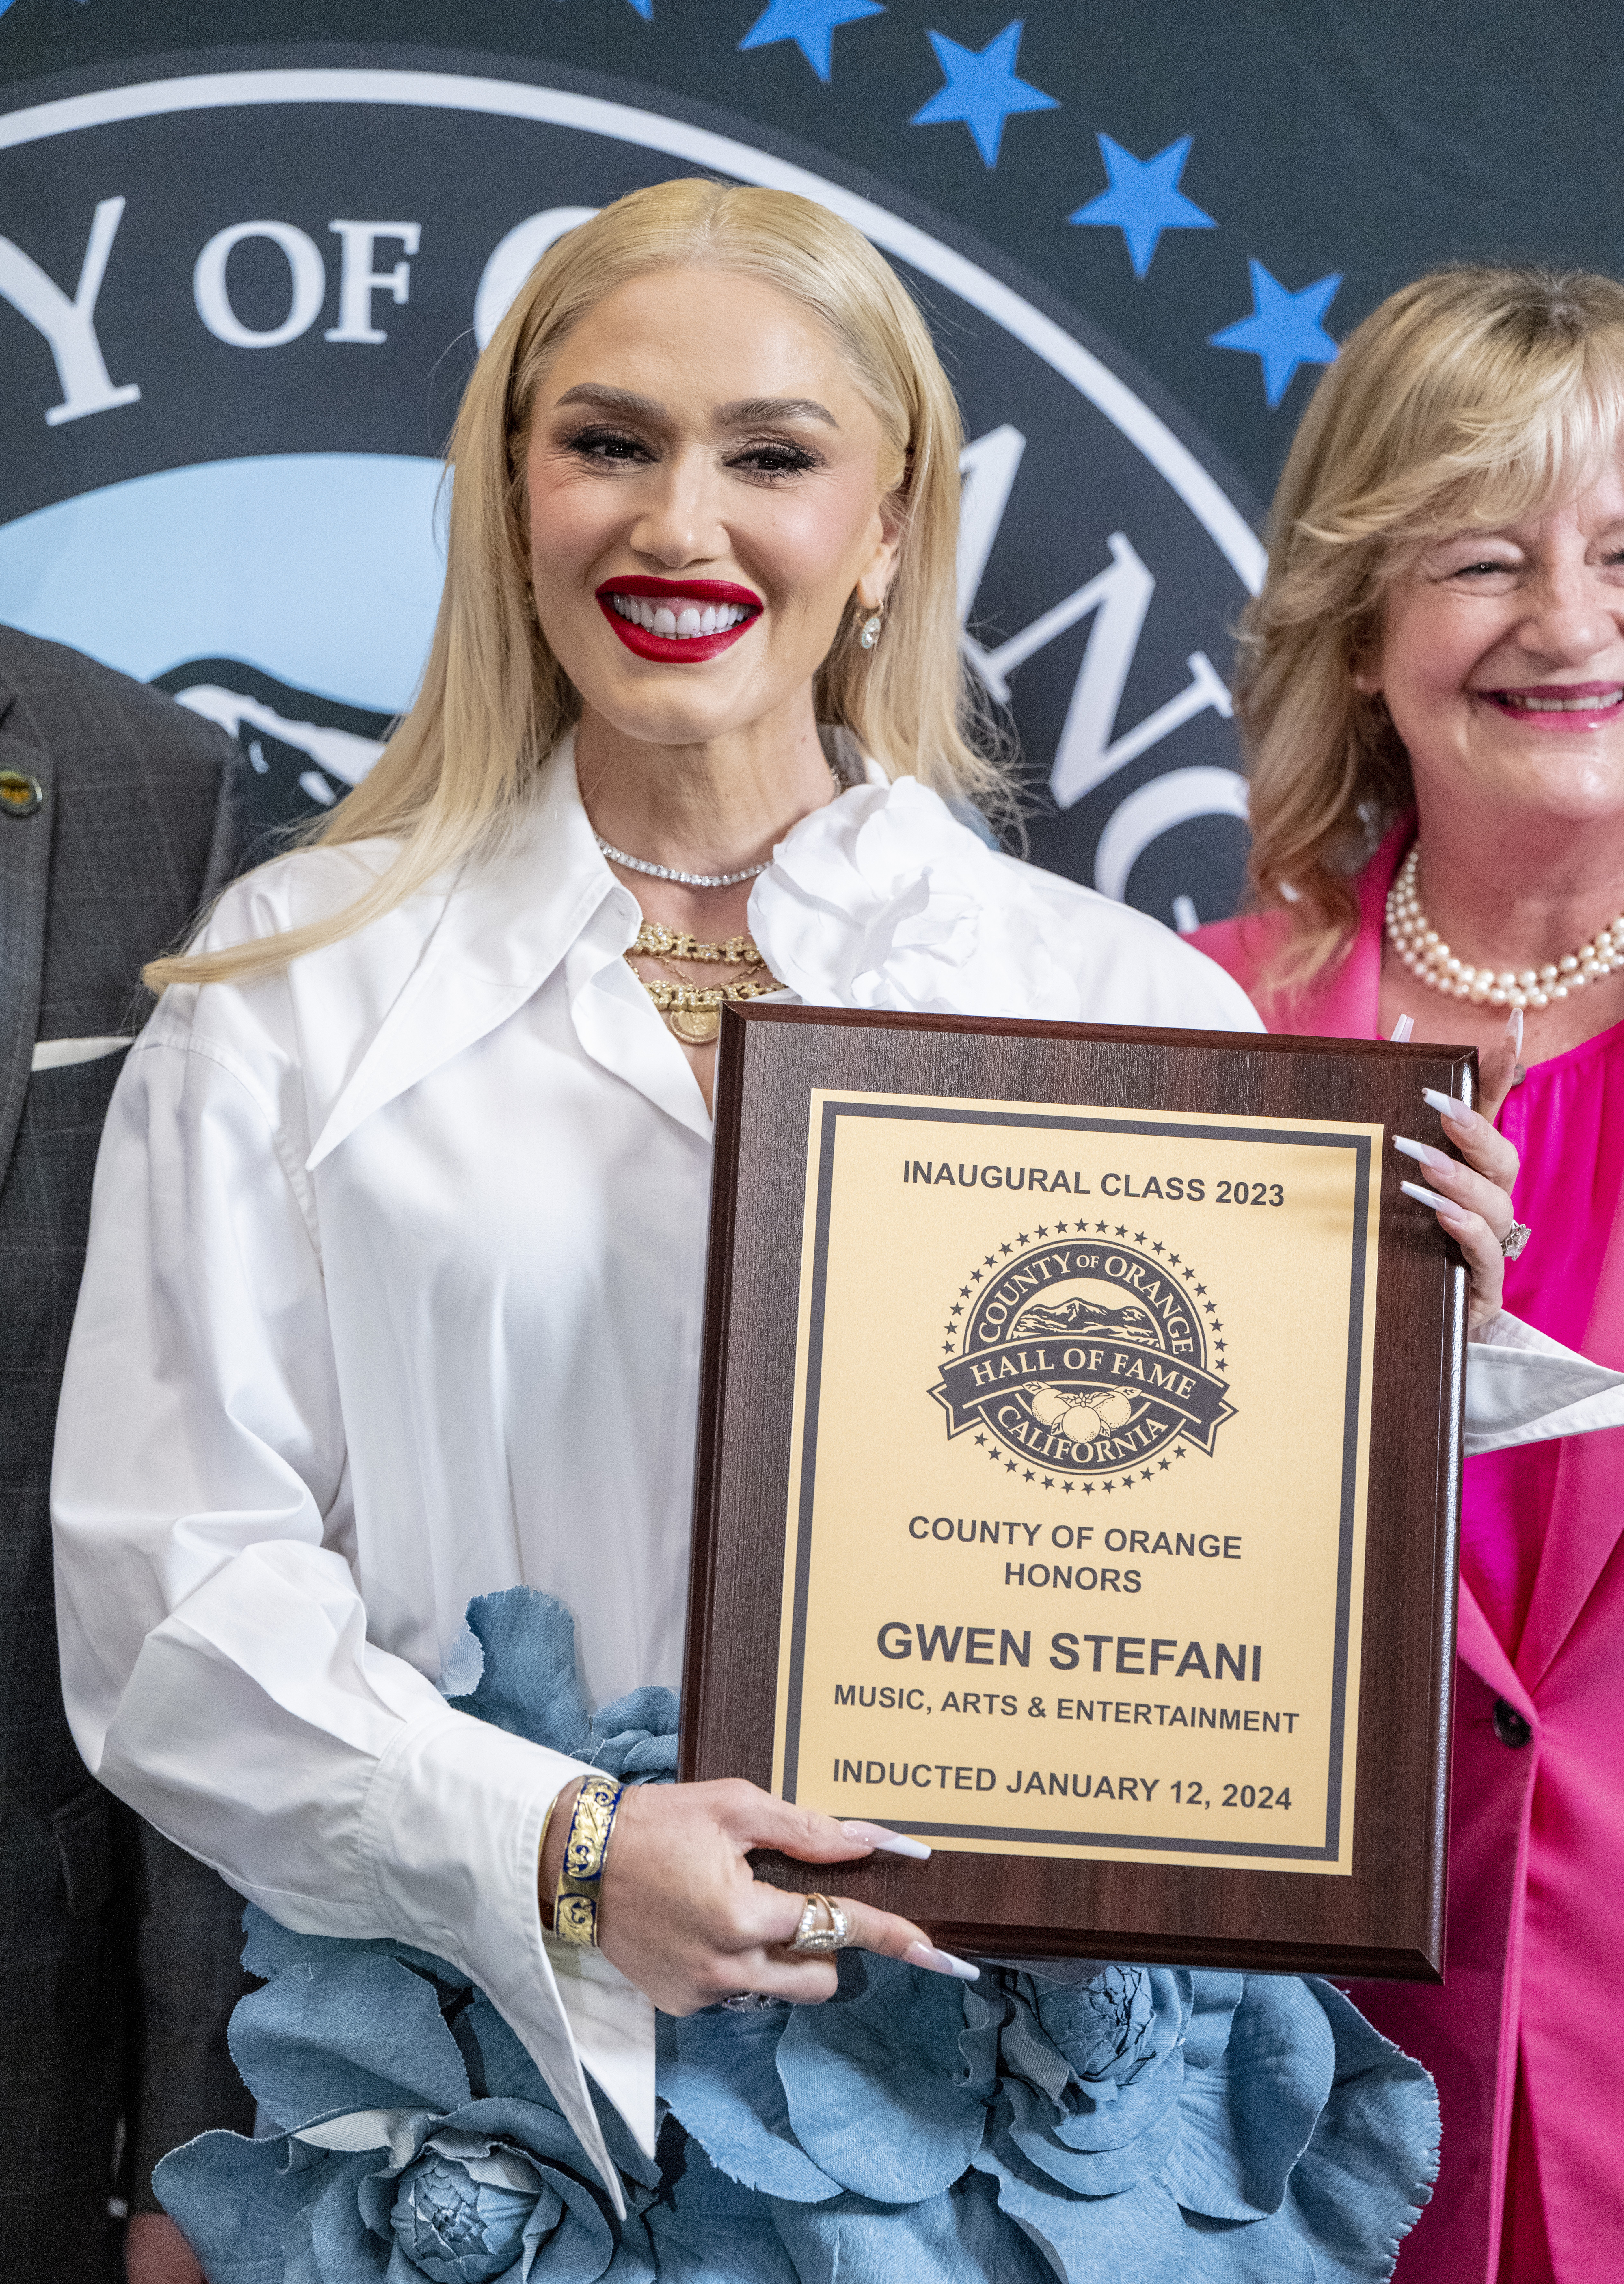 Gwen Stefani holding a plaque at the Orange County Music, Arts &amp;amp; Entertainment Hall of Fame 2023 event, smiling, with two individuals partly visible behind her